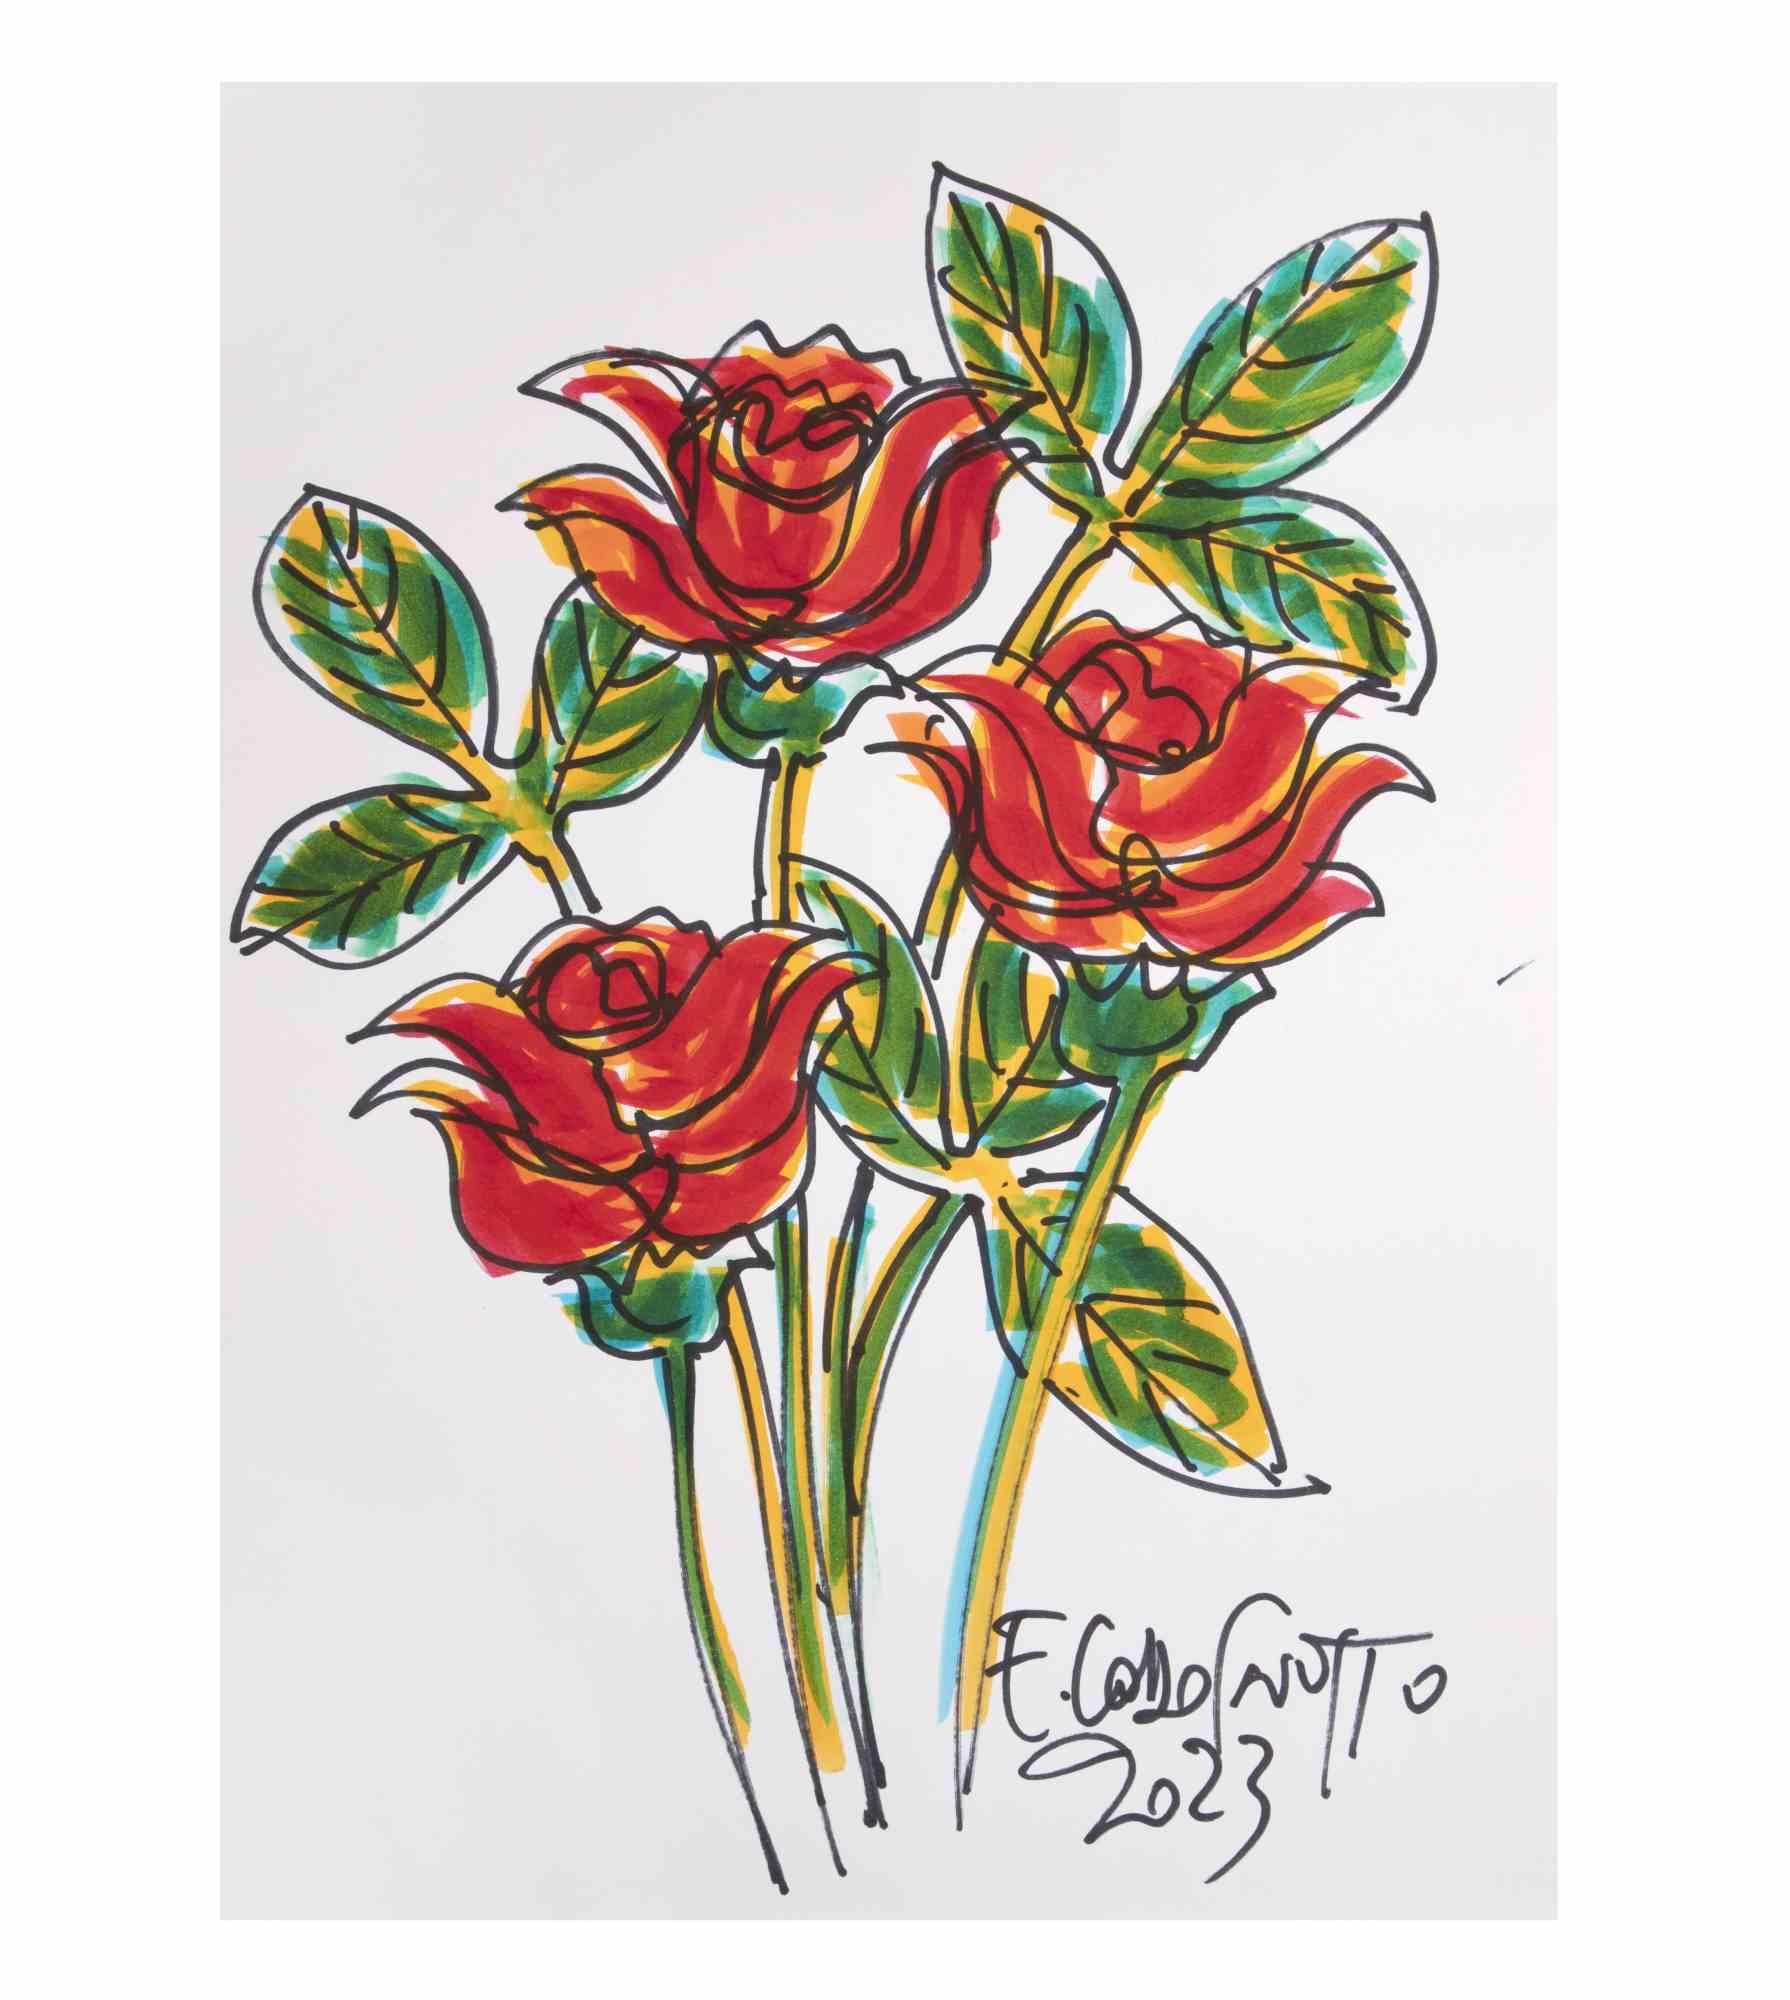 Red Roses-  Marker  Drawing by Ferdinando Codognotto - 2023